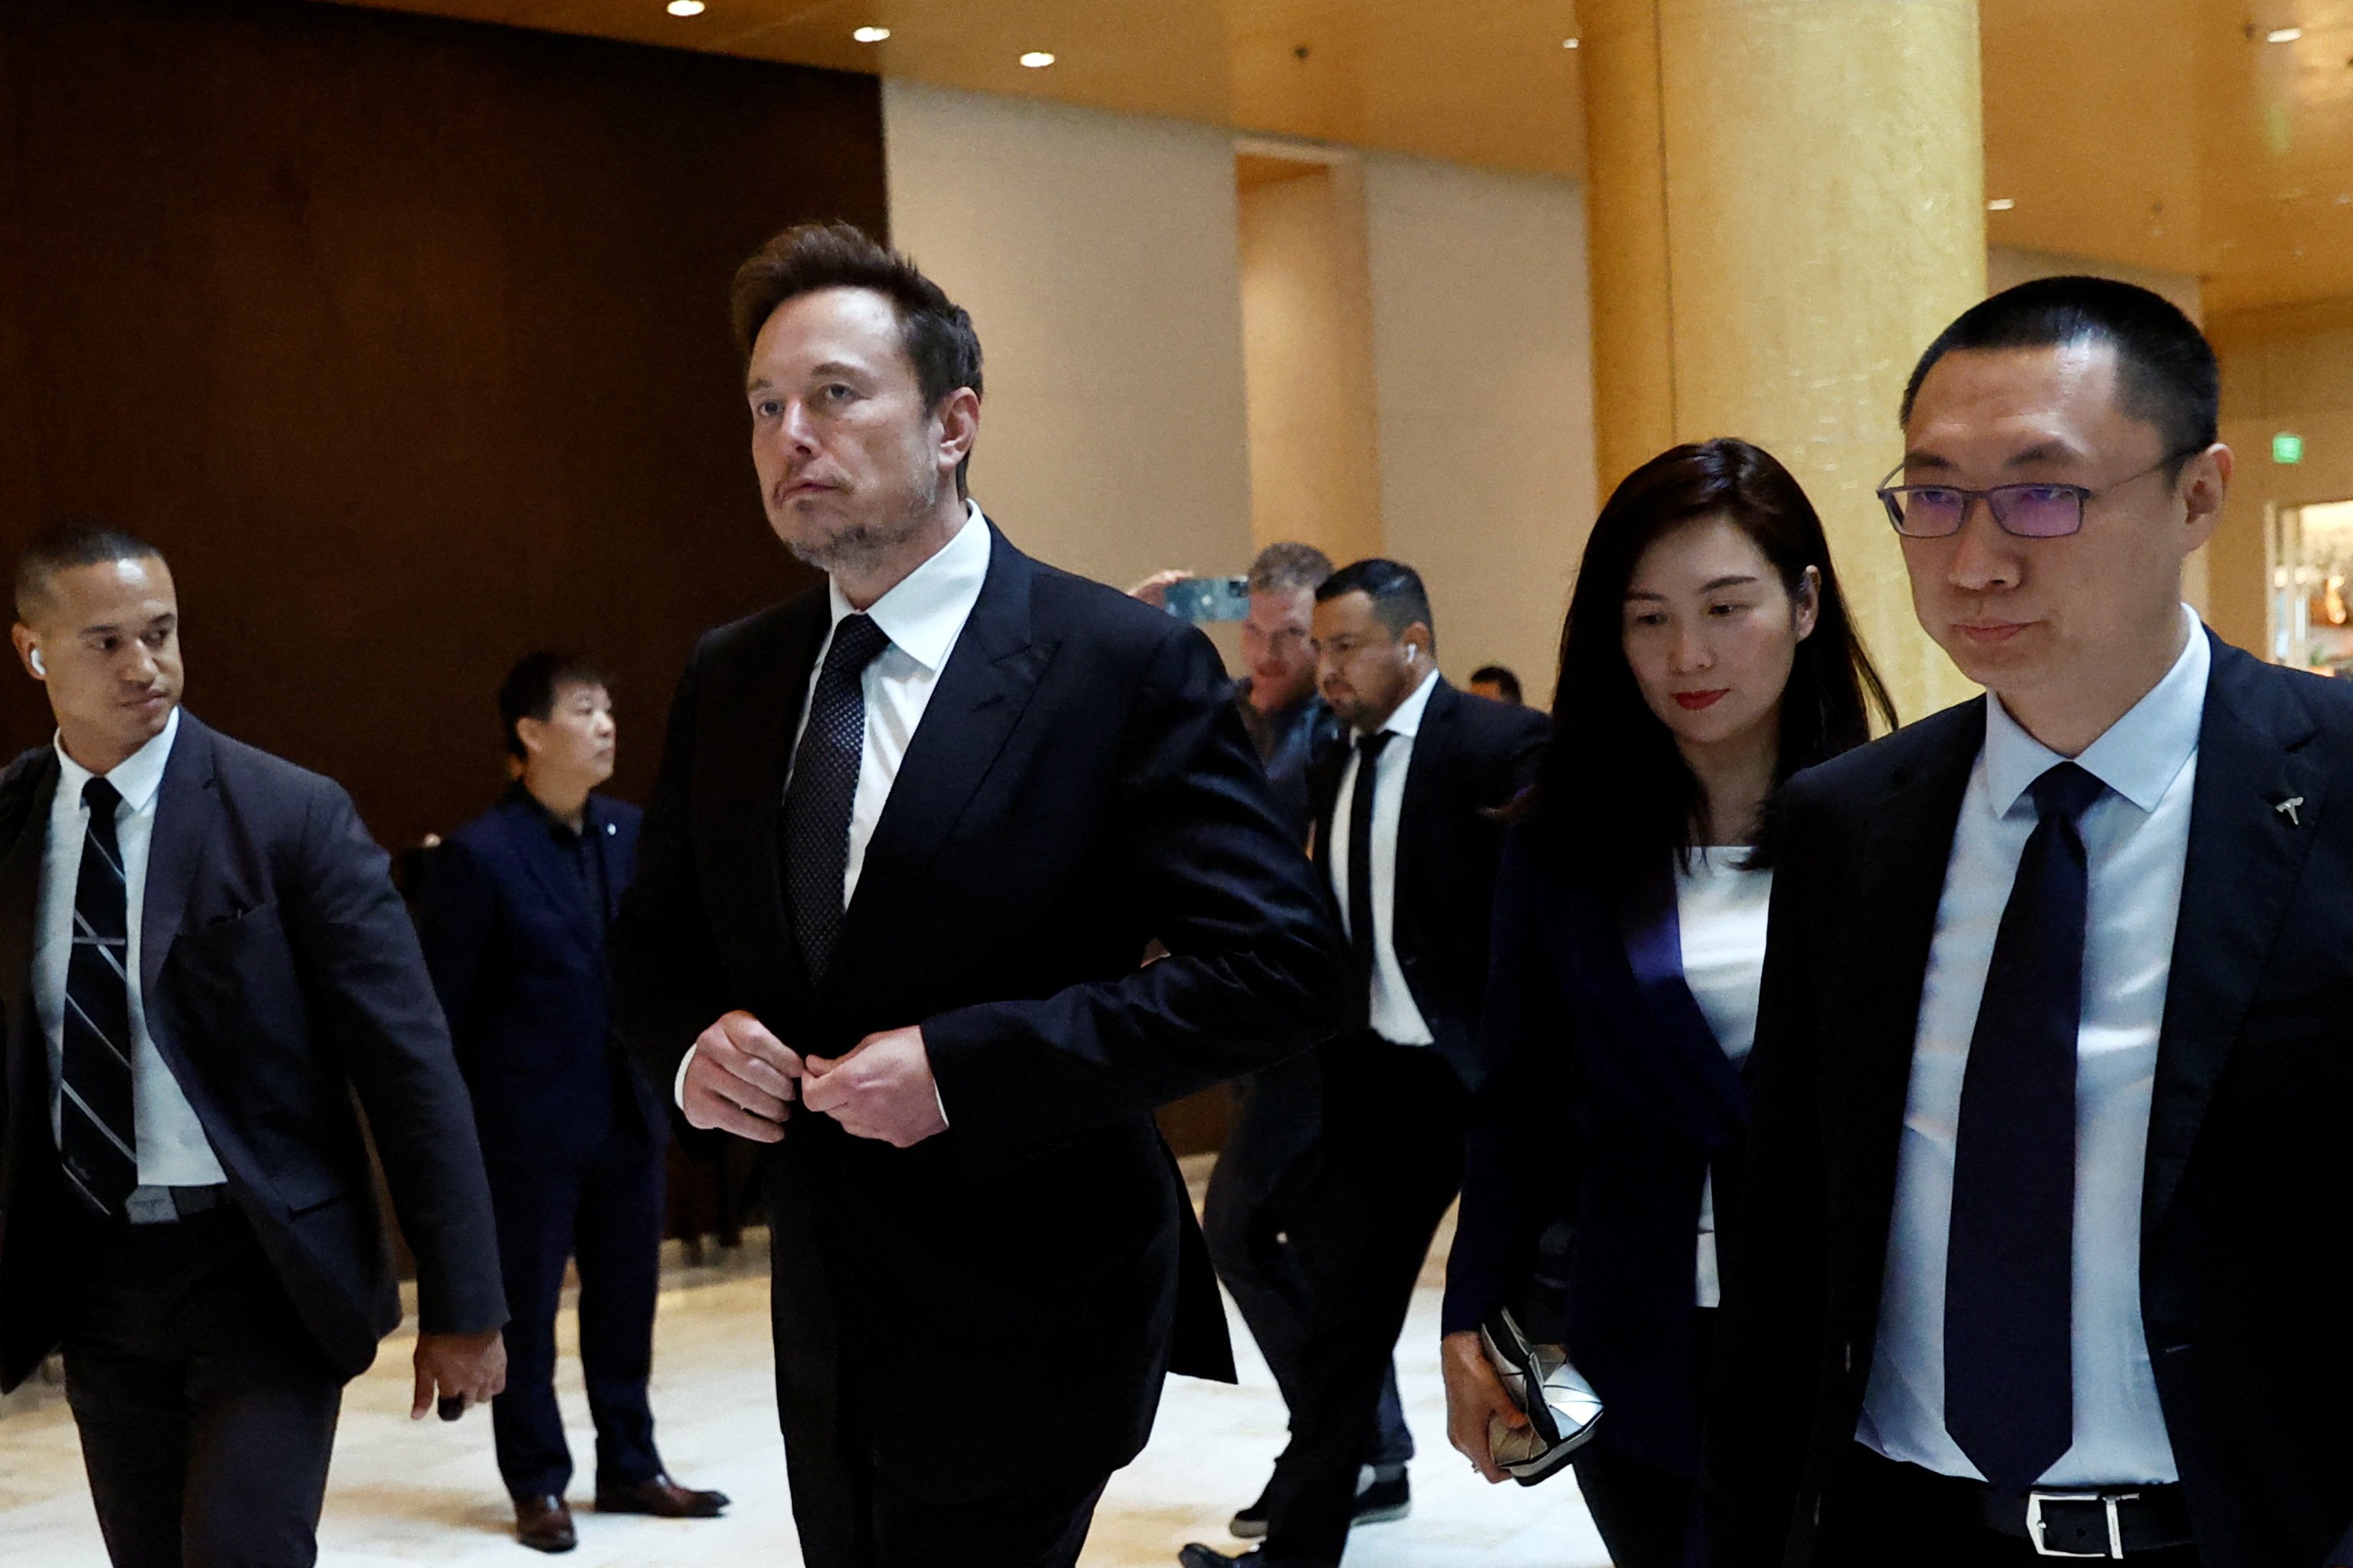 Tesla Chief Executive Officer Elon Musk (left) walks next to Tesla’s Senior Vice-President Tom Zhu (right) and Vice-President Grace Tao as he leaves a hotel in Beijing, China in May 2023. Photo: Reuters